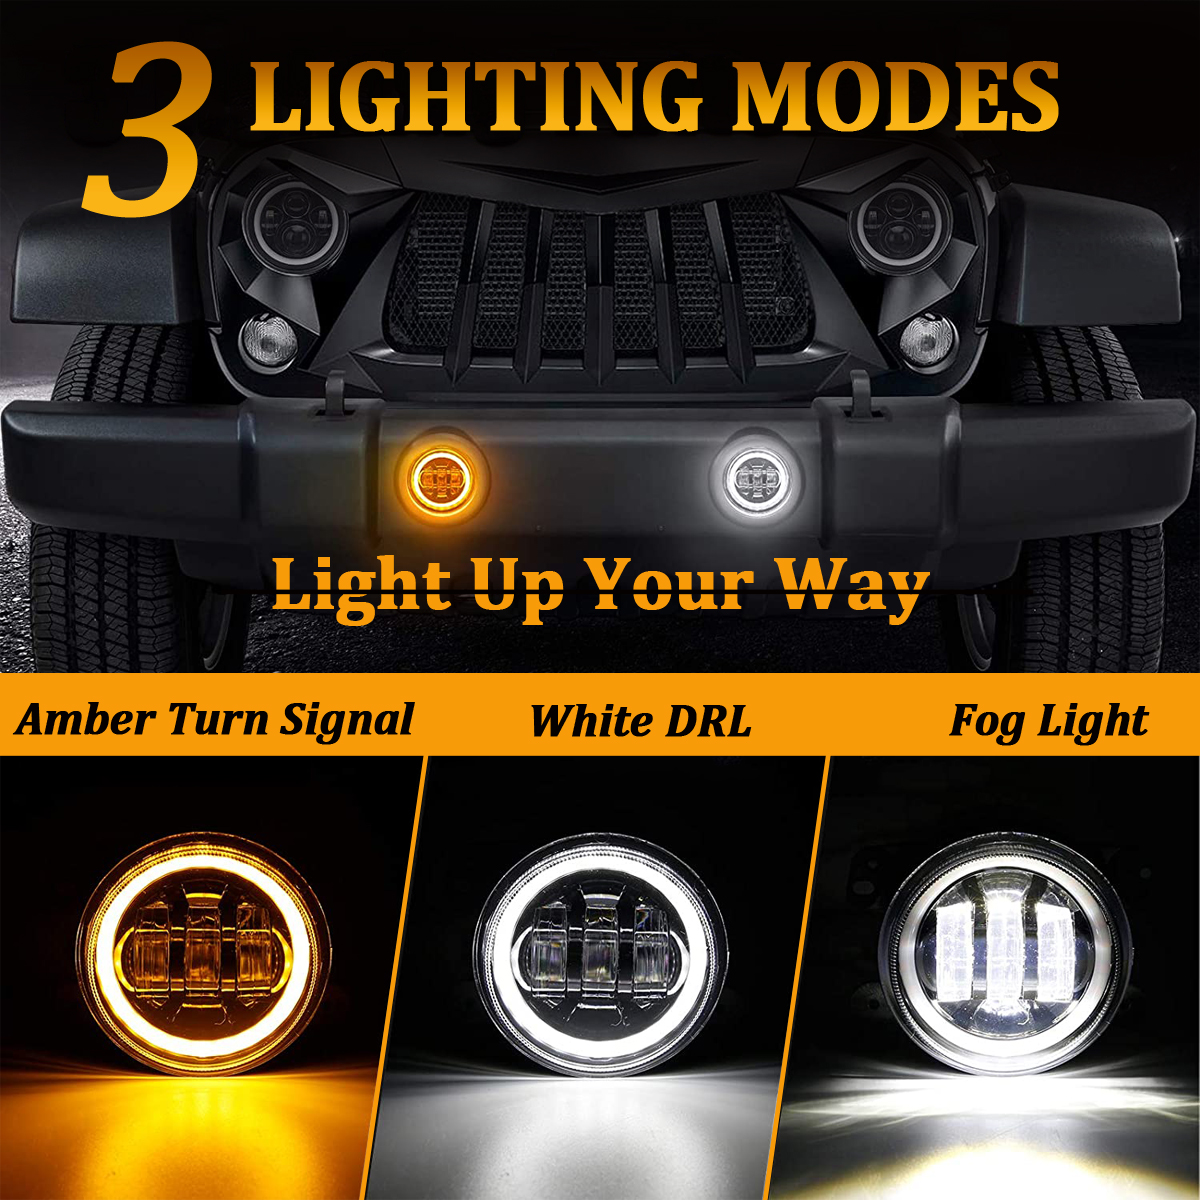 4 inch LED Fog Lights with White DRL Halo Ring Fit for 2007-2018 Wrangler JK SEALIGHT 7 inch Round Led Headlight with White DRL/Amber Turn Signal H4-H13 Adapter 